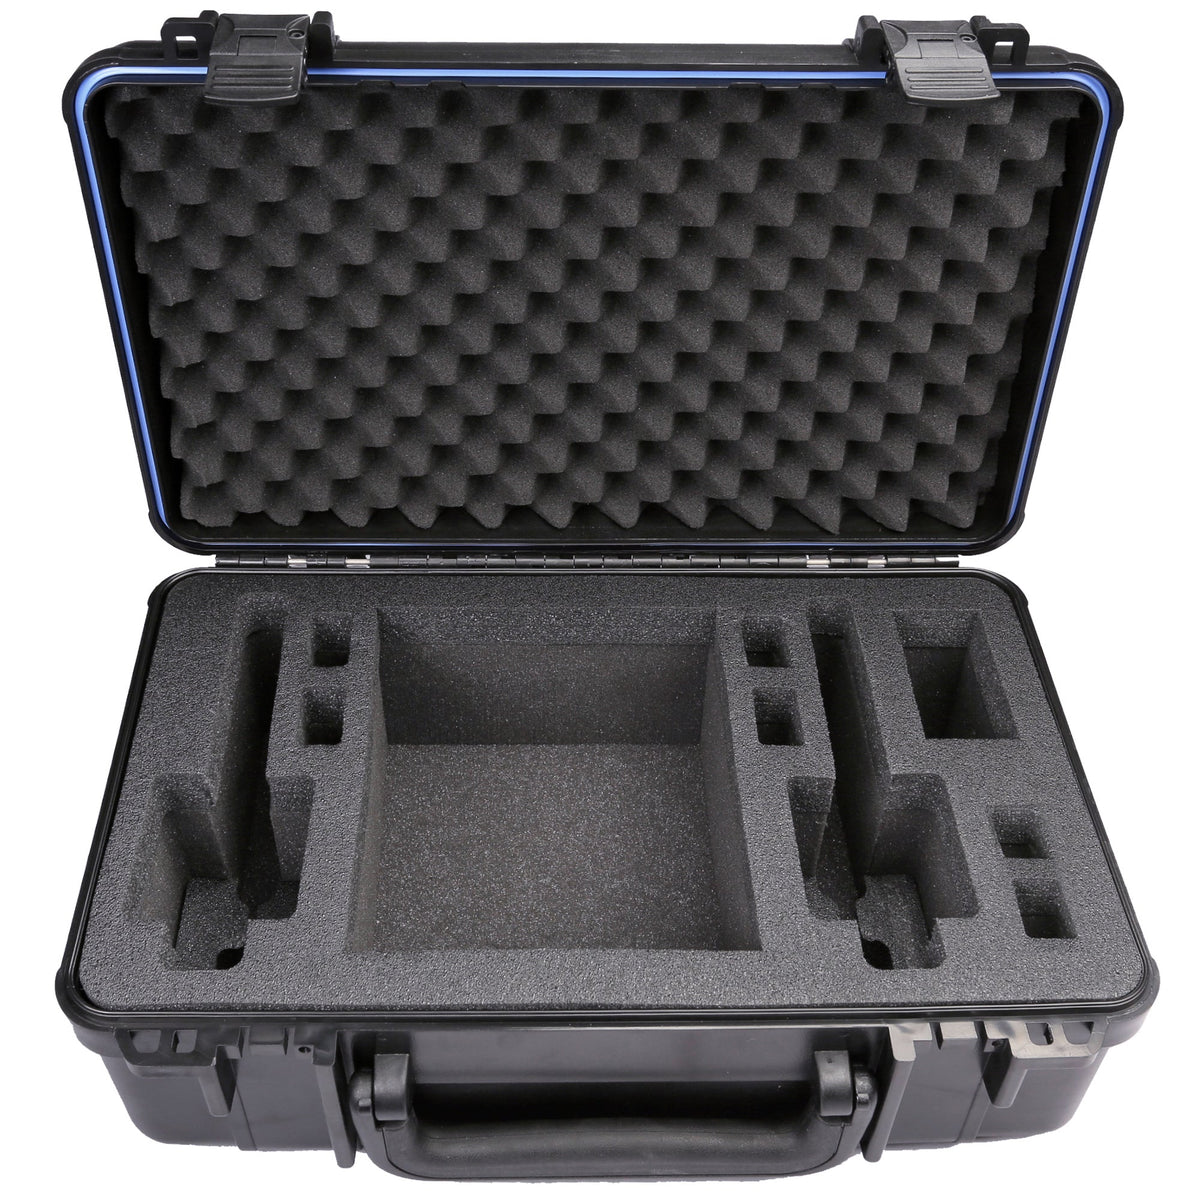 Peli Cases UK - Airline Carry-on Luggage Size And Weights